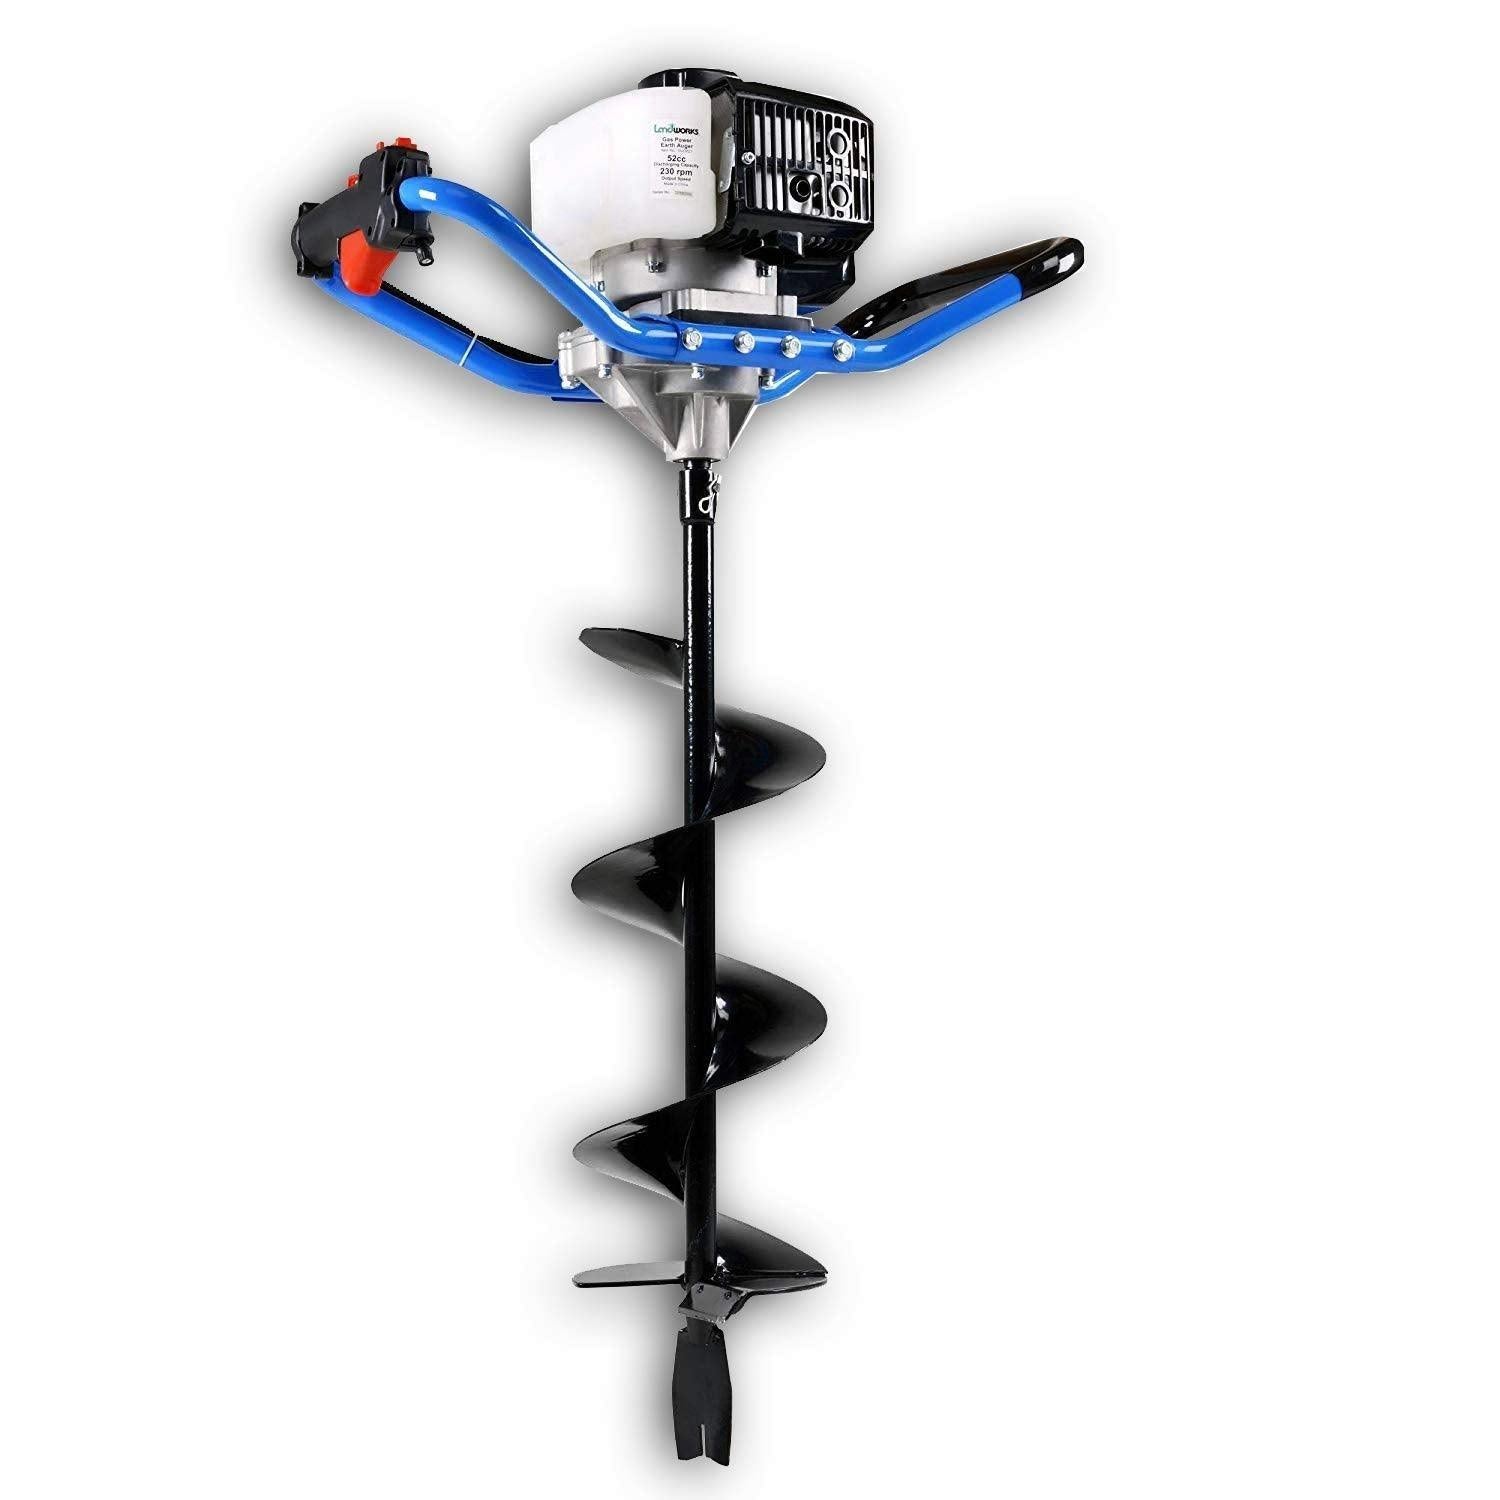 Landworks Gas Powered Earth Auger - 3HP 52CC 2 Stroke, 8" x 30" Drill Bit, 3/4" Output Shaft - DIY Tools by GreatCircleUS